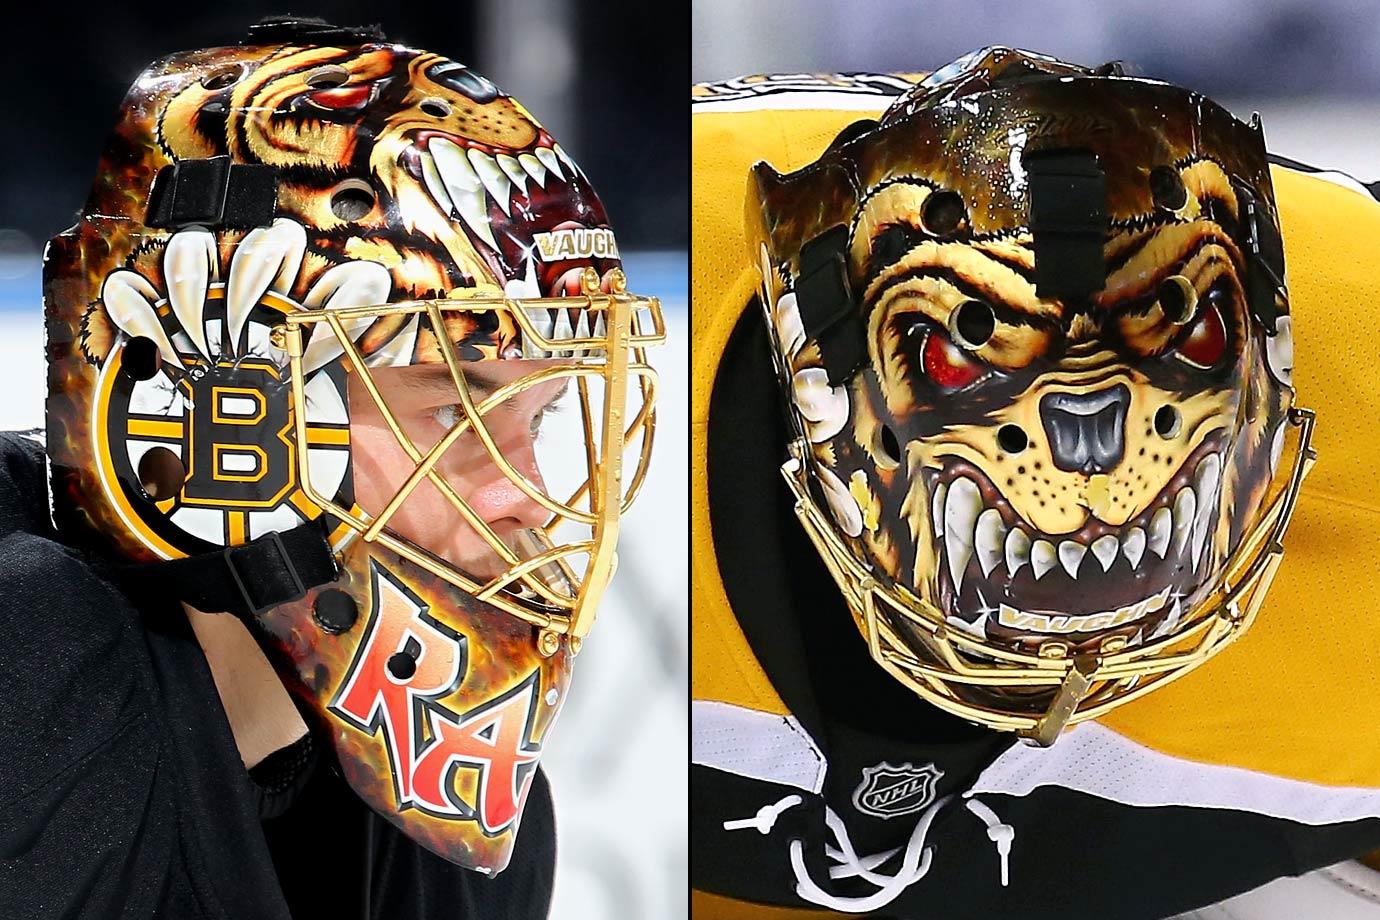 The artwork on the backplate of the mask of Boston Bruins goalie